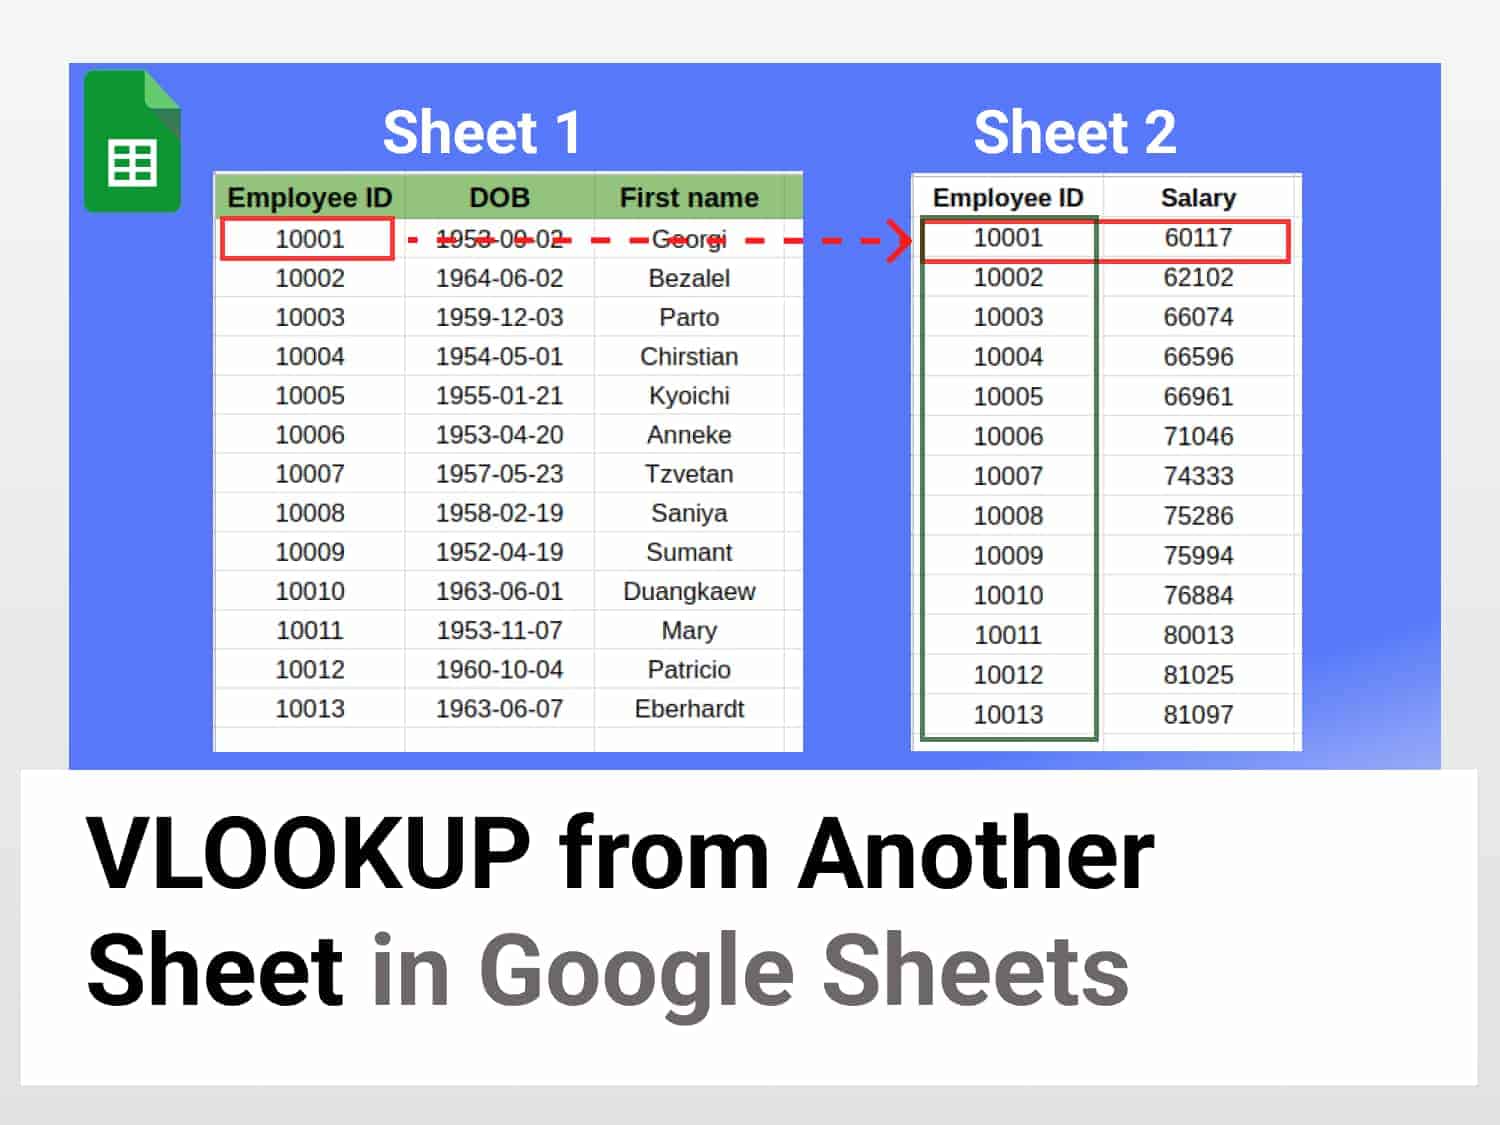 VLOOKUP from another sheet in Google Sheets